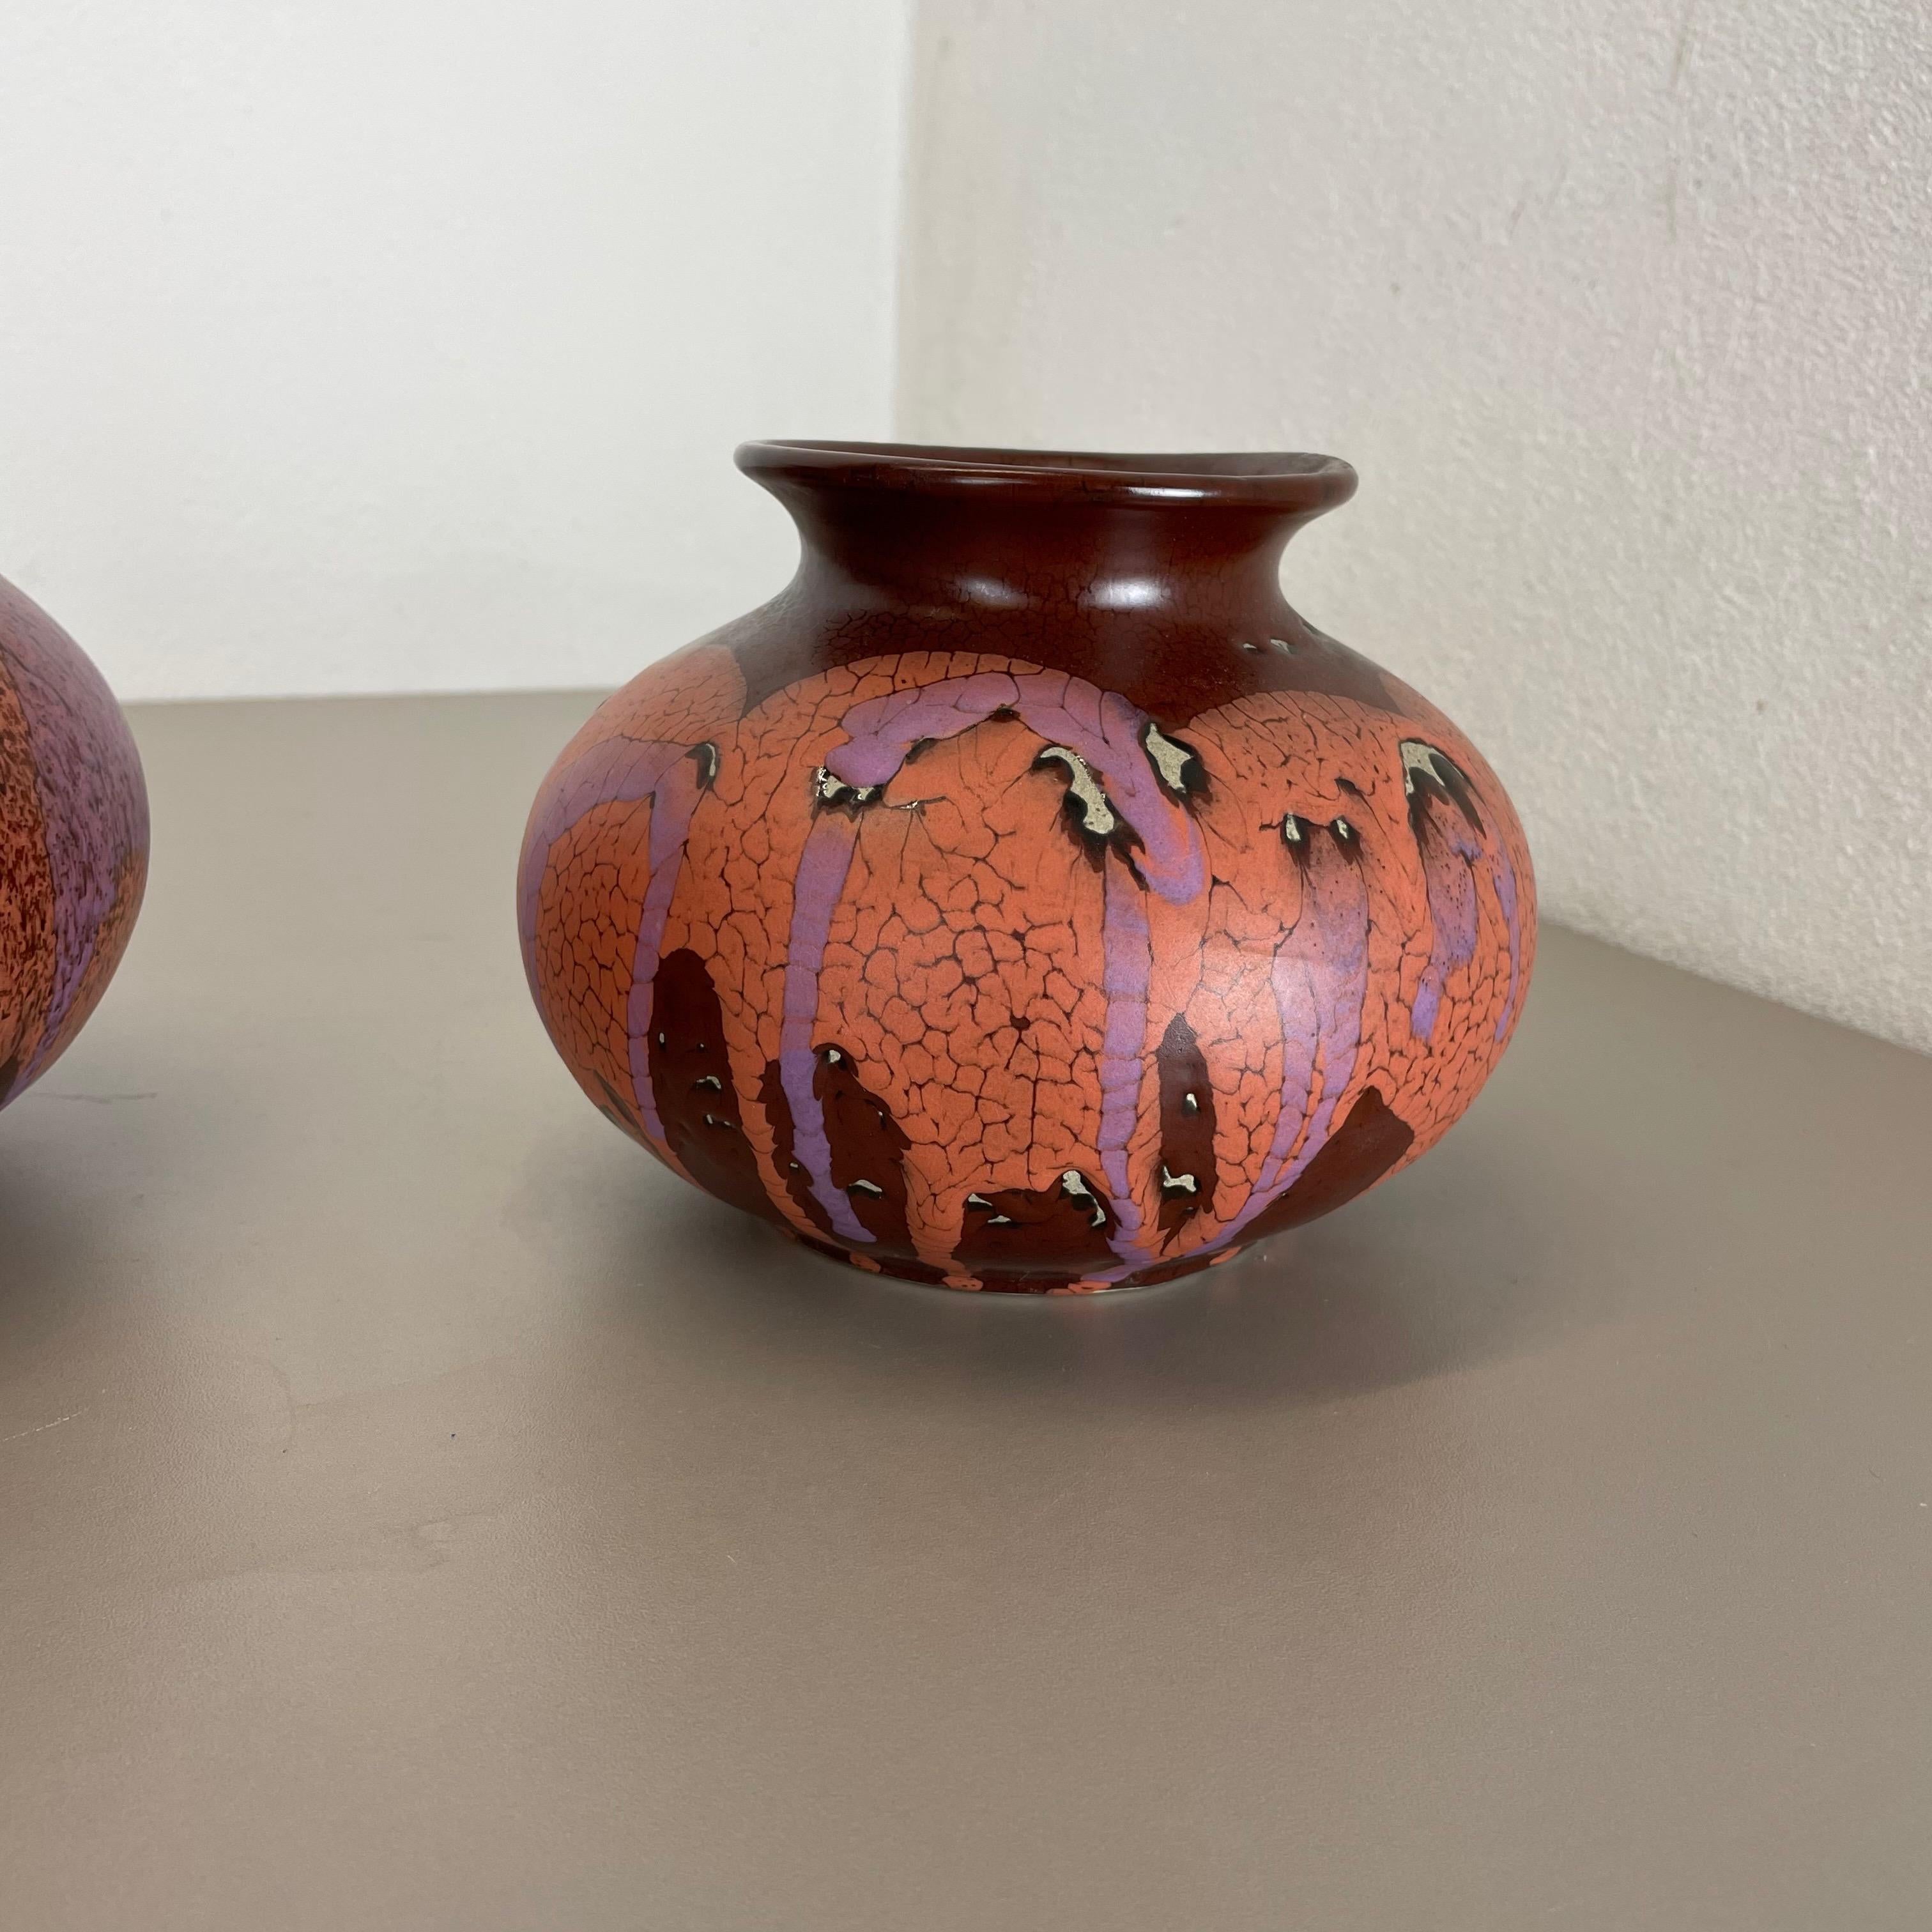 Set of Two Pottery Vases Objects by Steuler Ceramics, Germany, 1970s For Sale 1